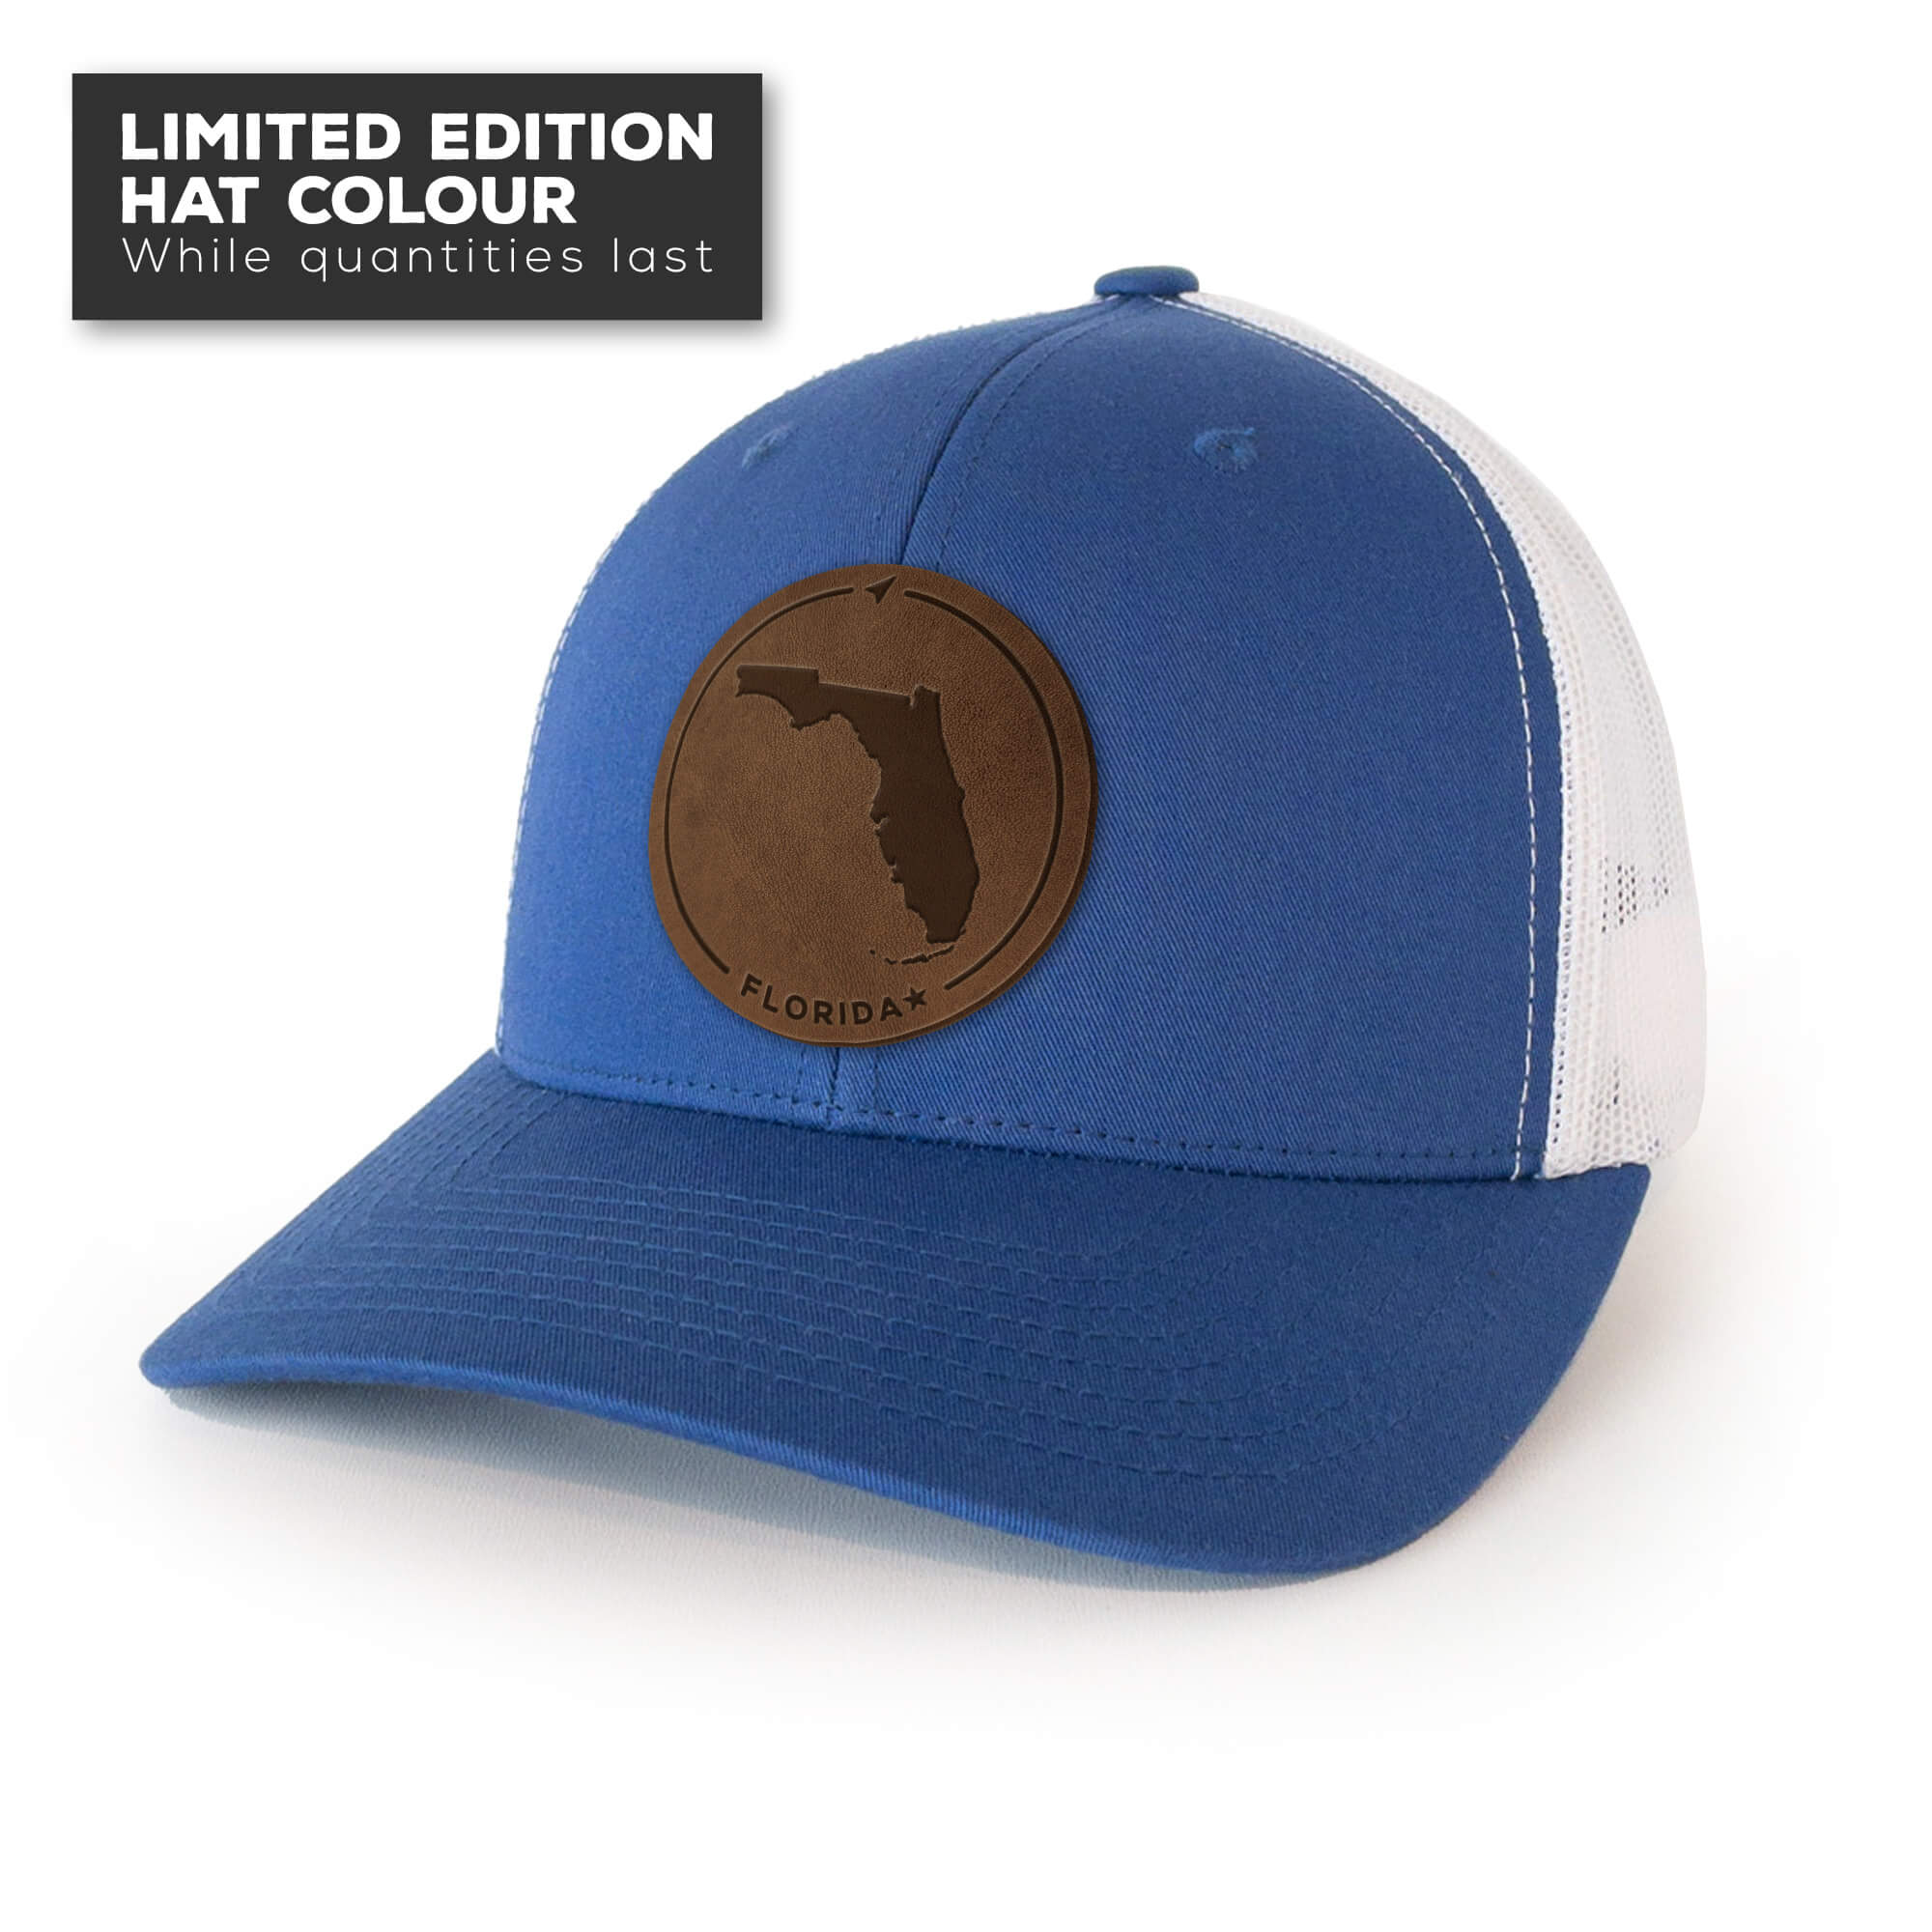 Royal Blue trucker hat with full-grain leather patch of Florida